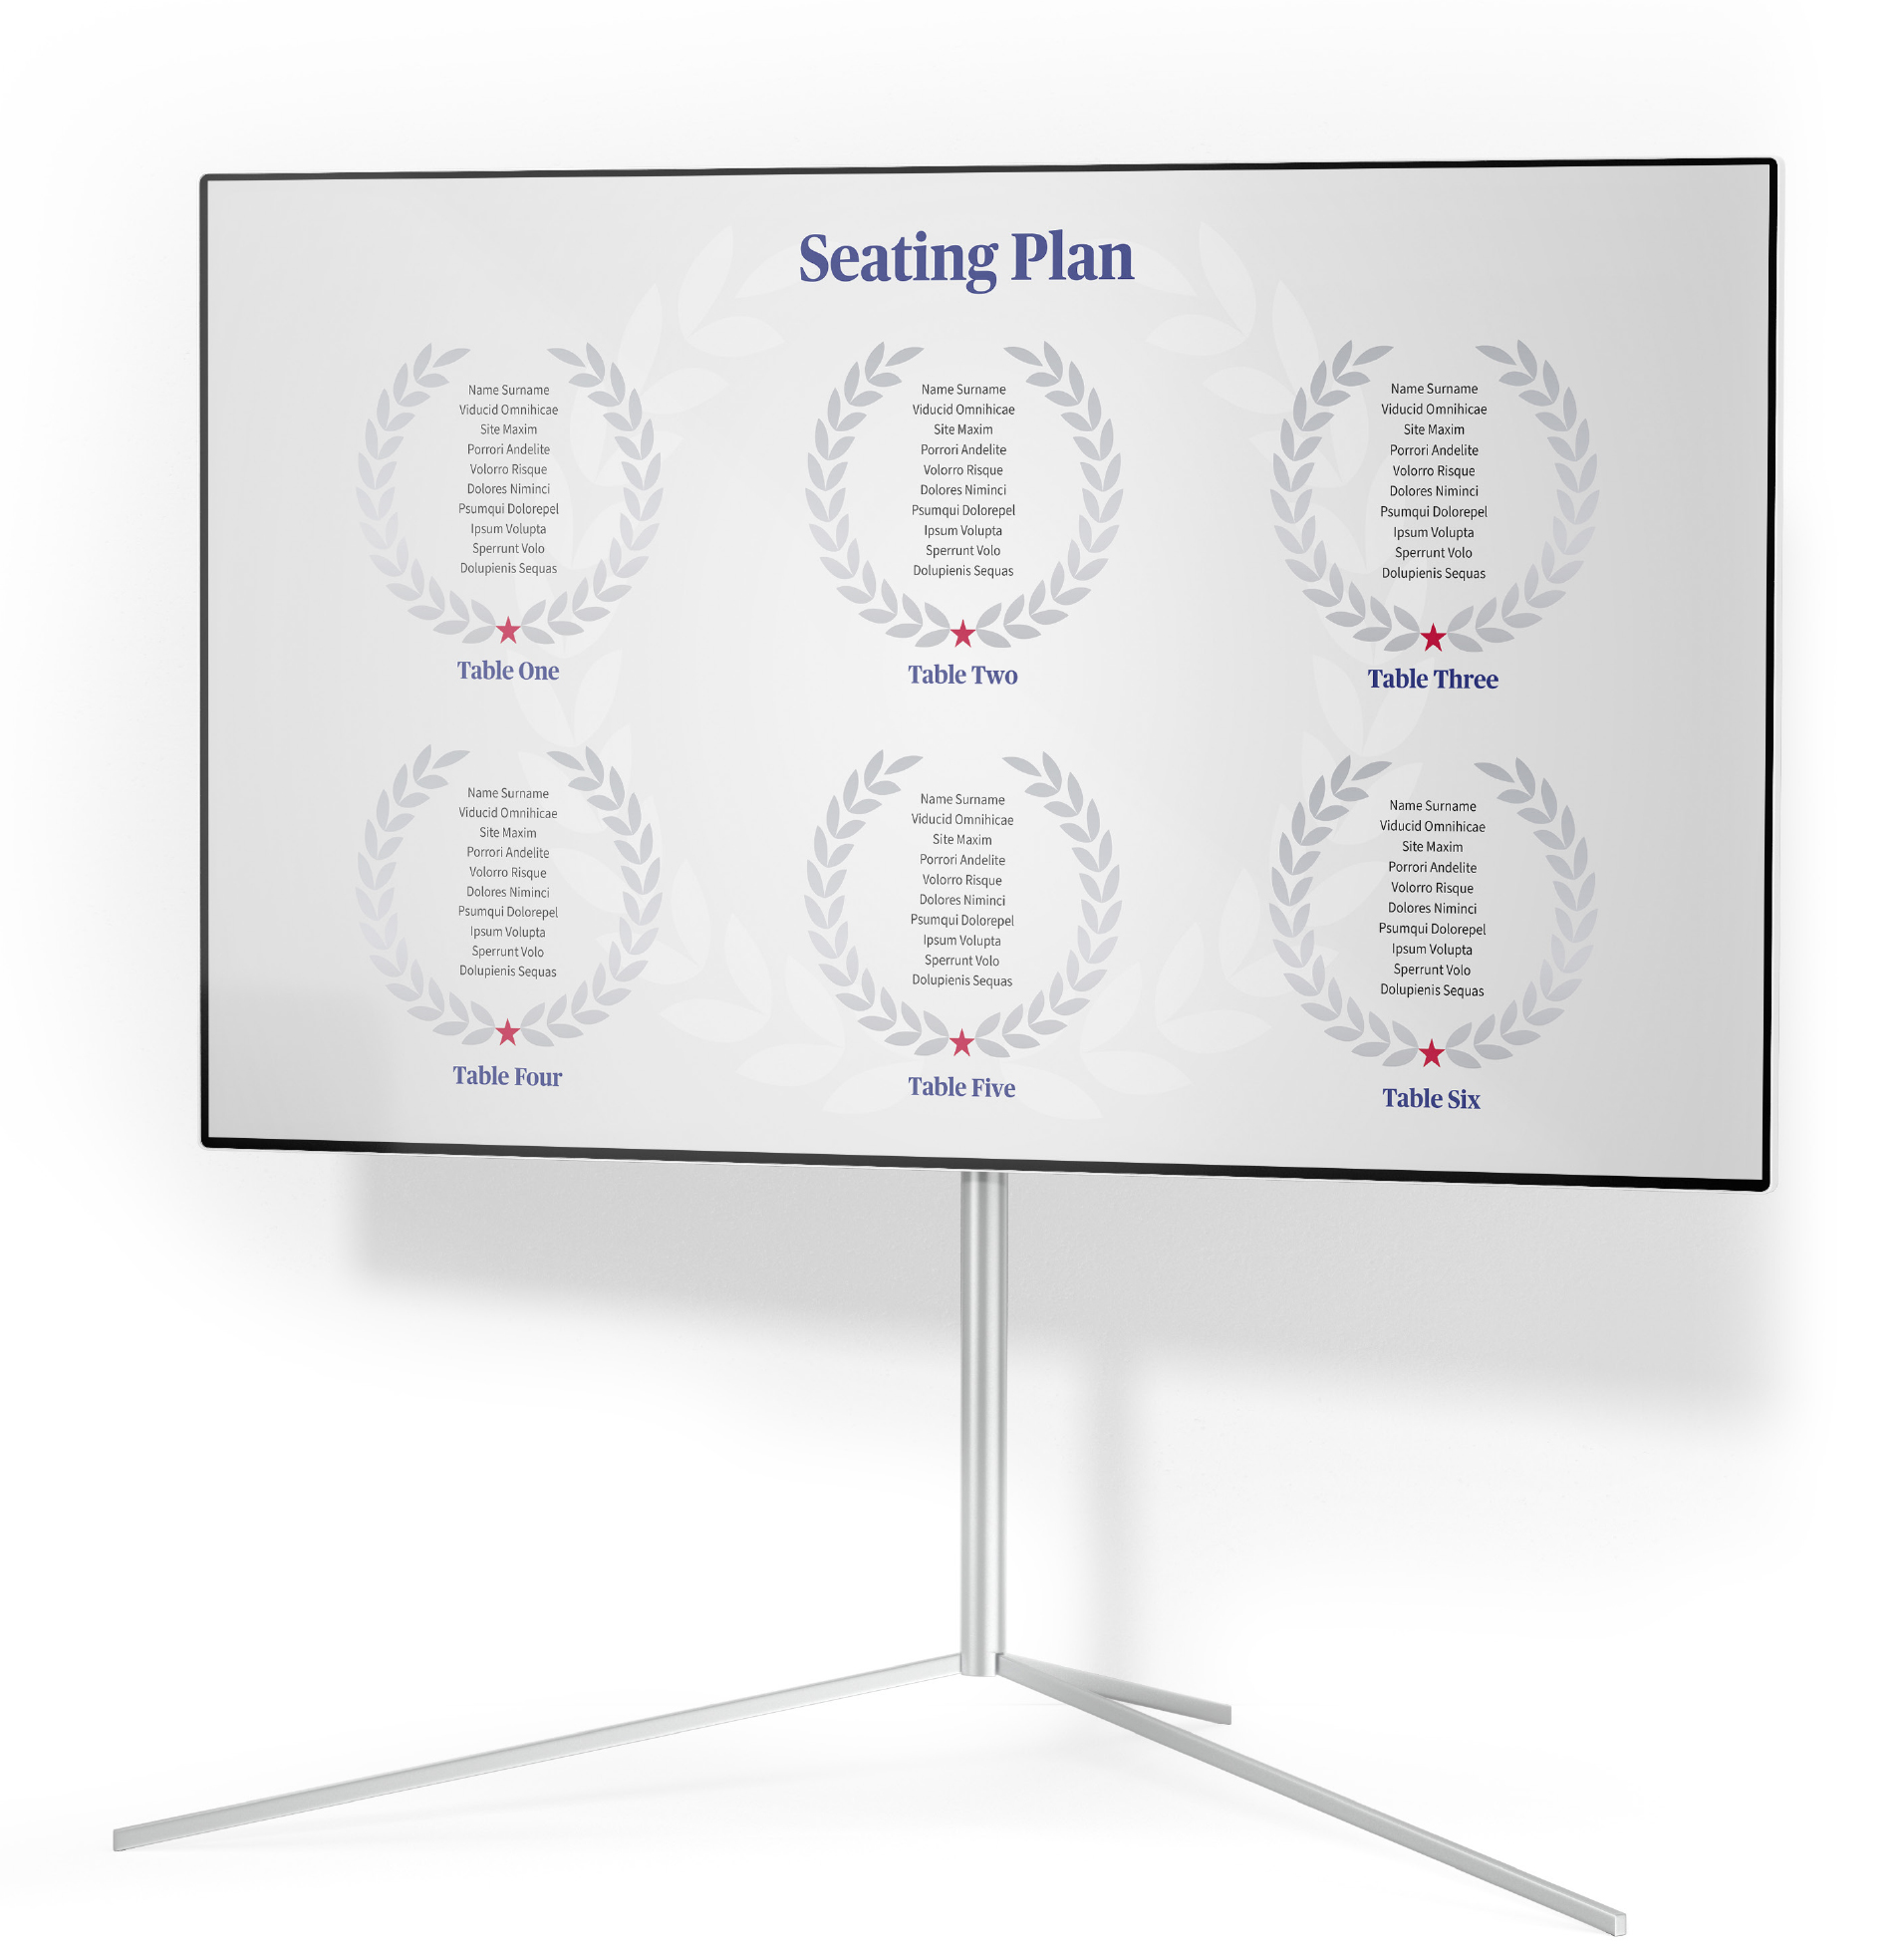 Know You Can Awards 2022 – seating plan